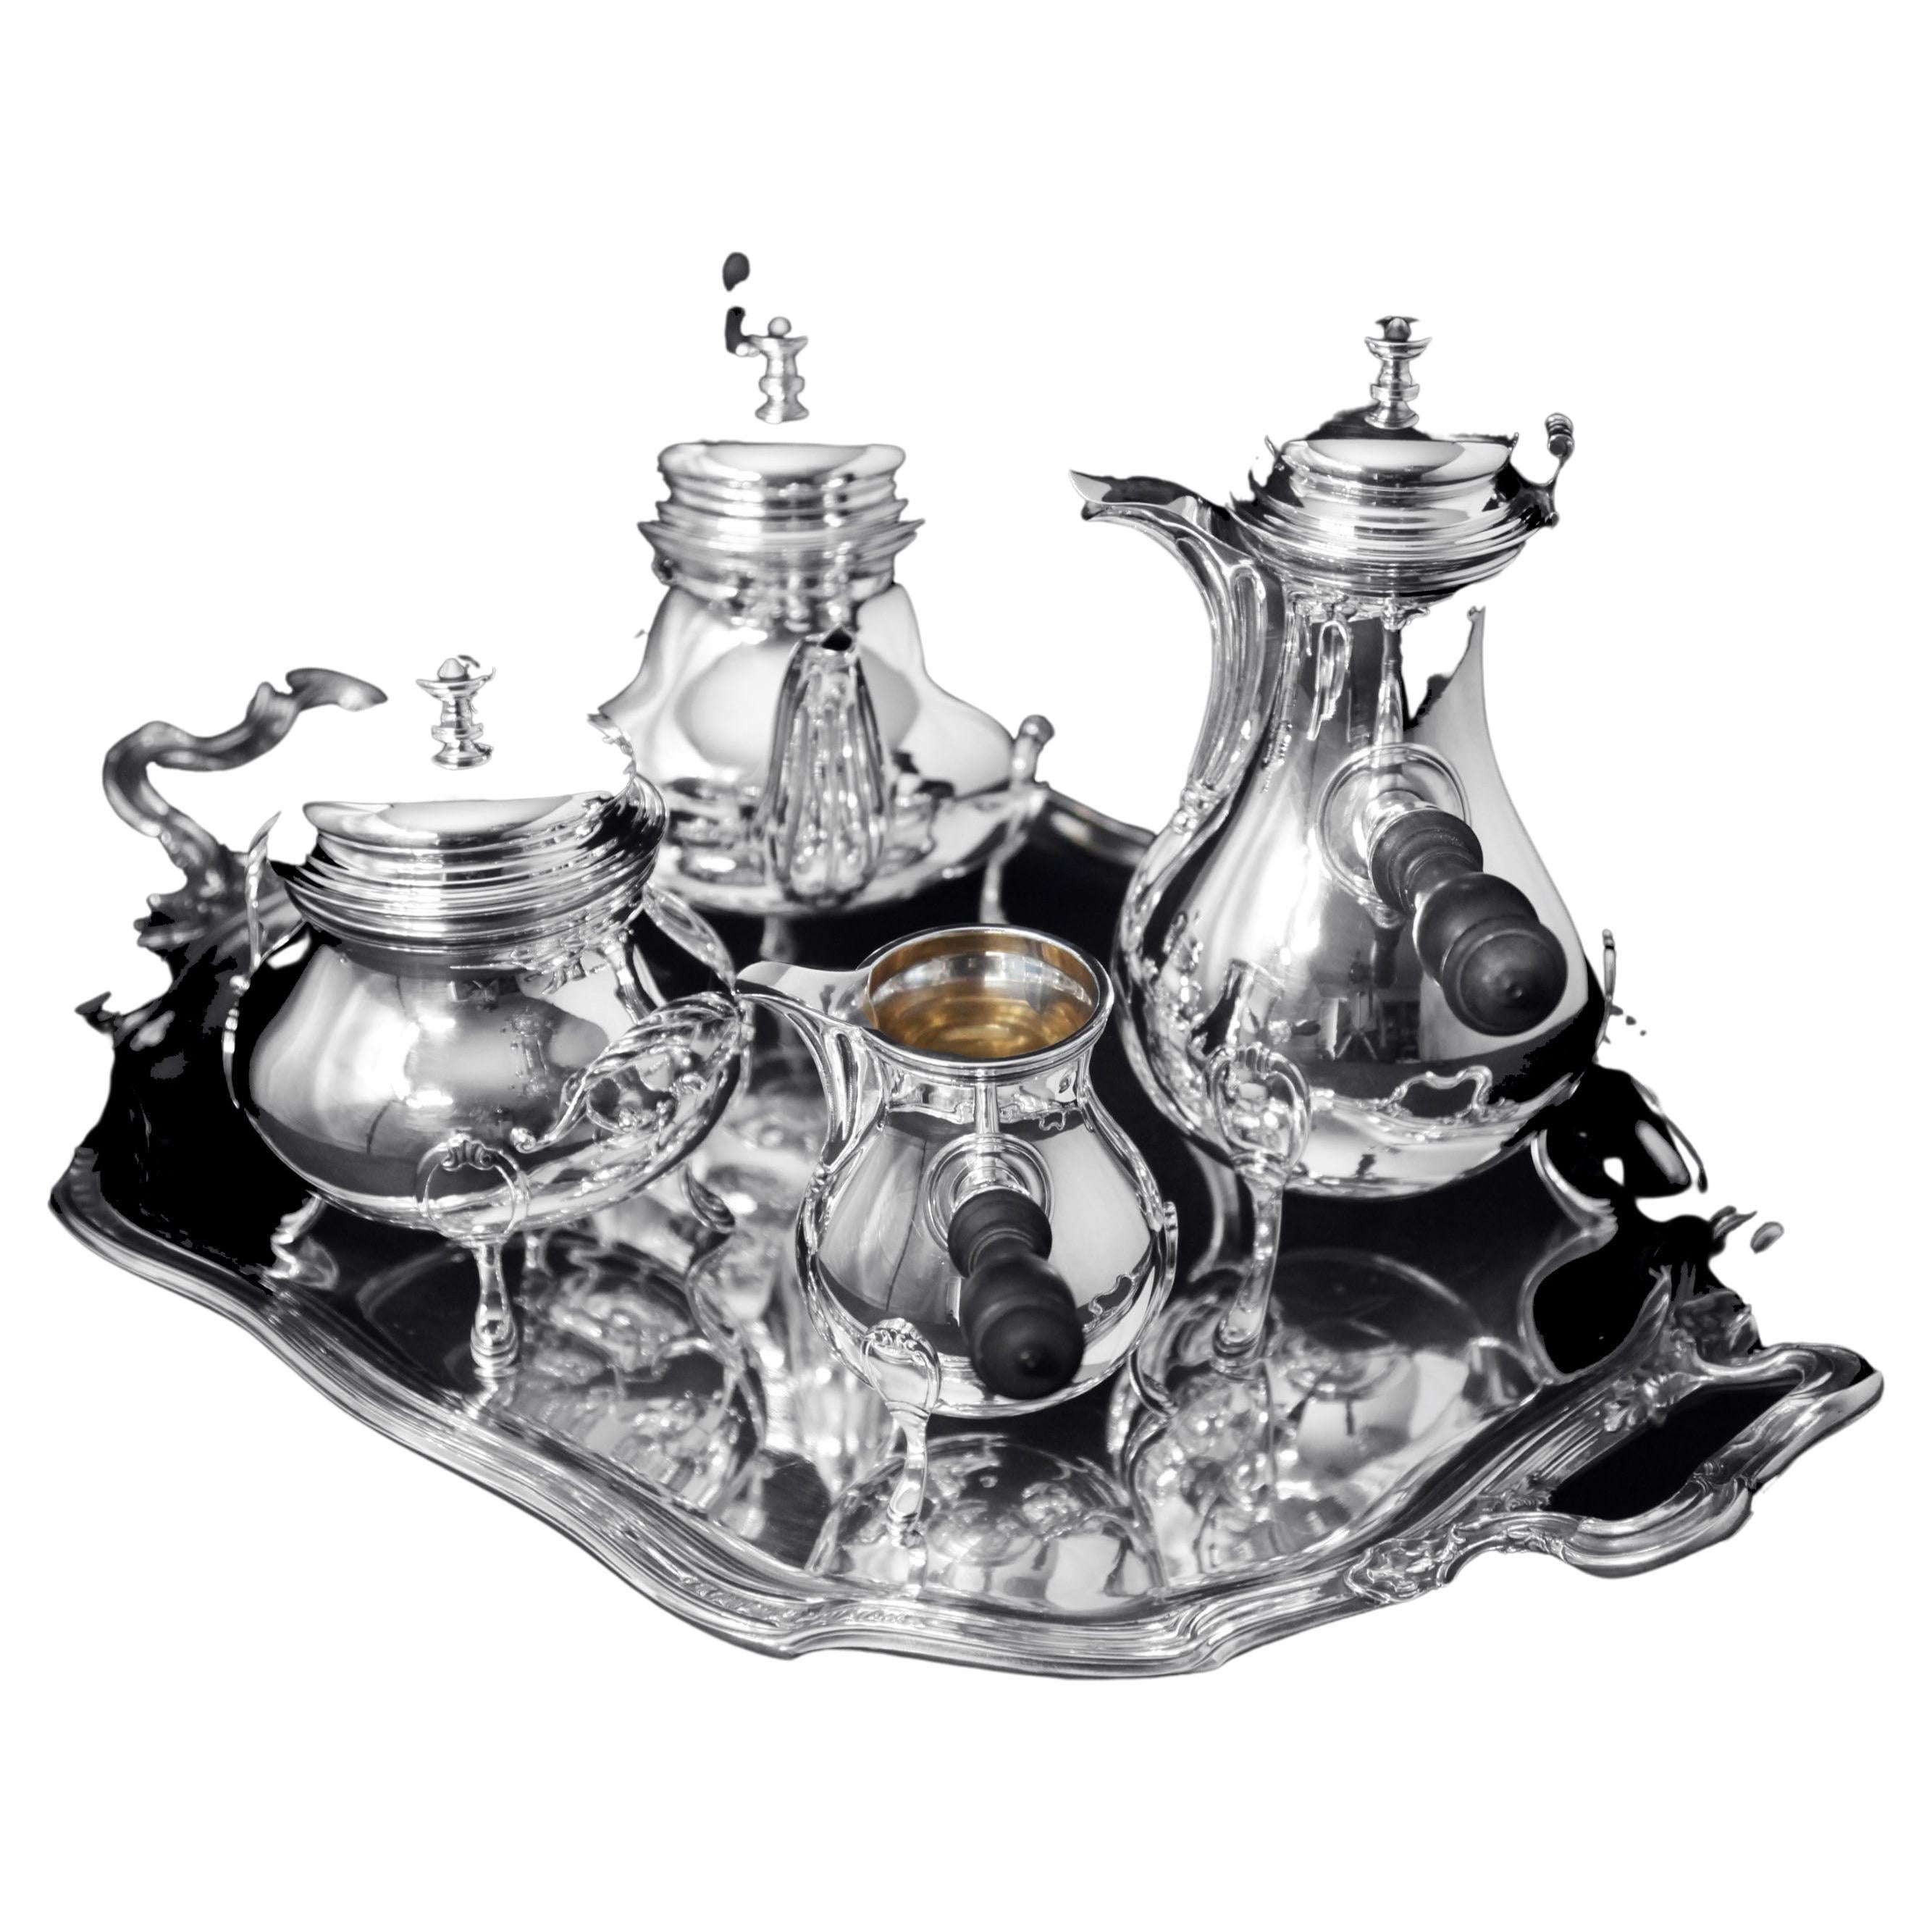 Odiot Henin - 5pc. Antique French 950 Sterling Silver Louis XVI Tea Set + Tray For Sale